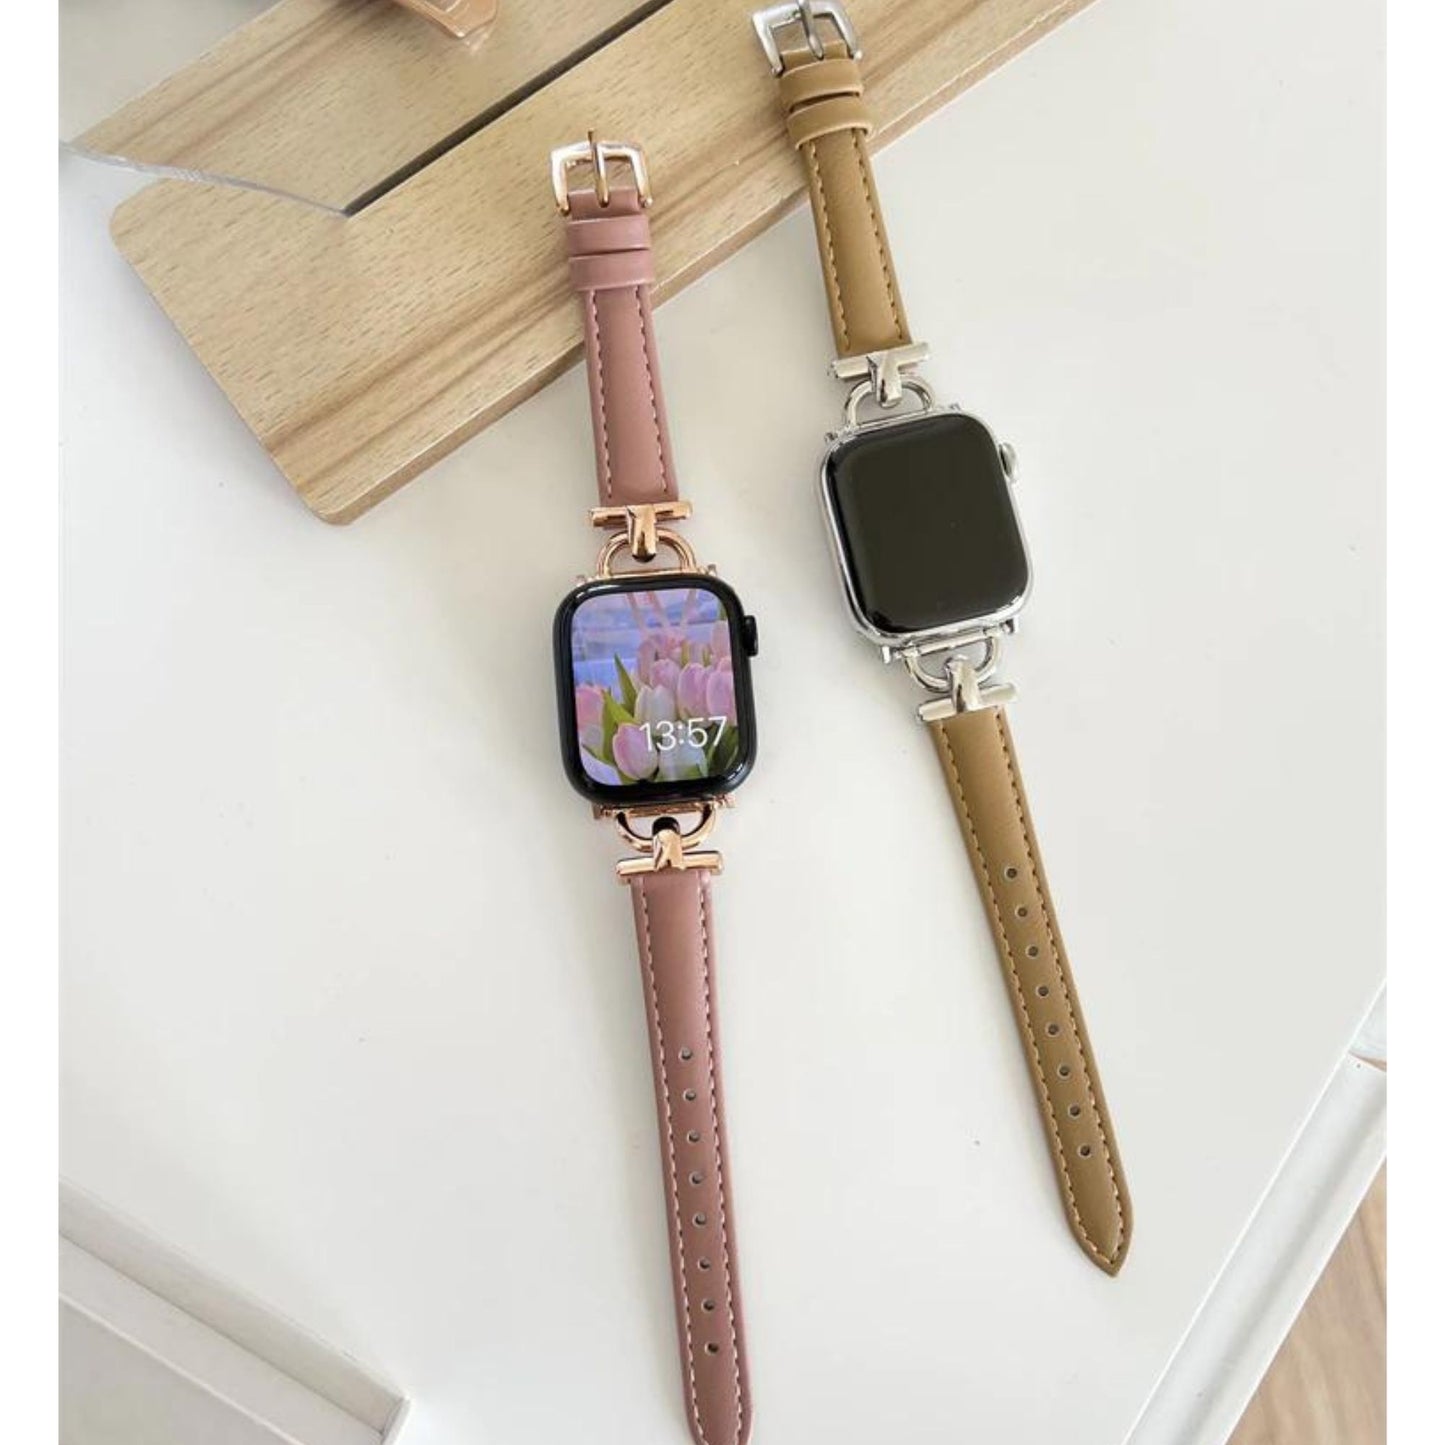 Slim Metal Hook Style Leather Apple Watch Band